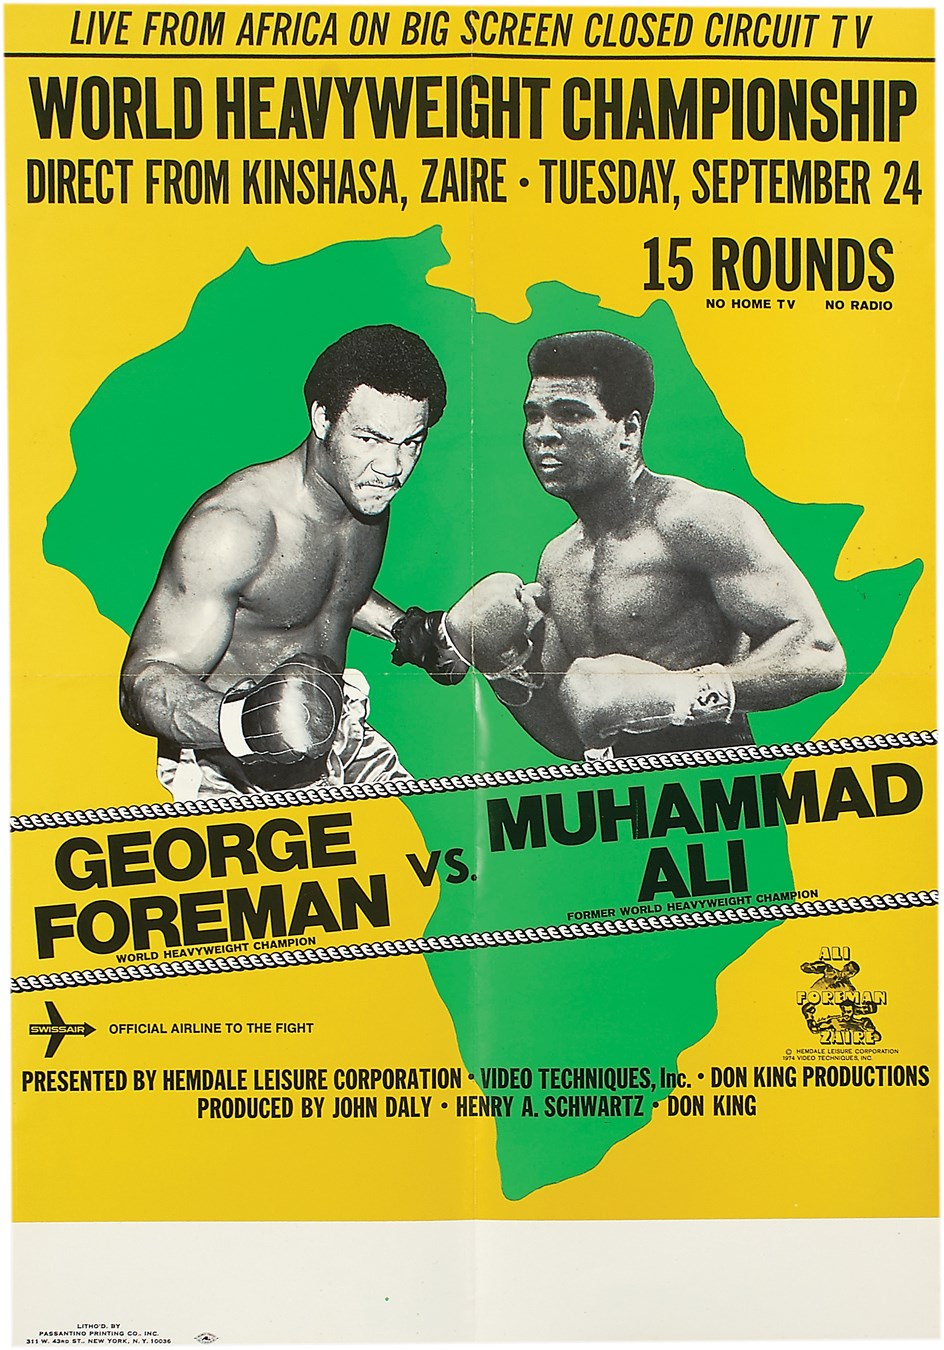 1974 Muhammad Ali vs. George Foreman "Rumble In The Jungle" Zaire Boxing Poster